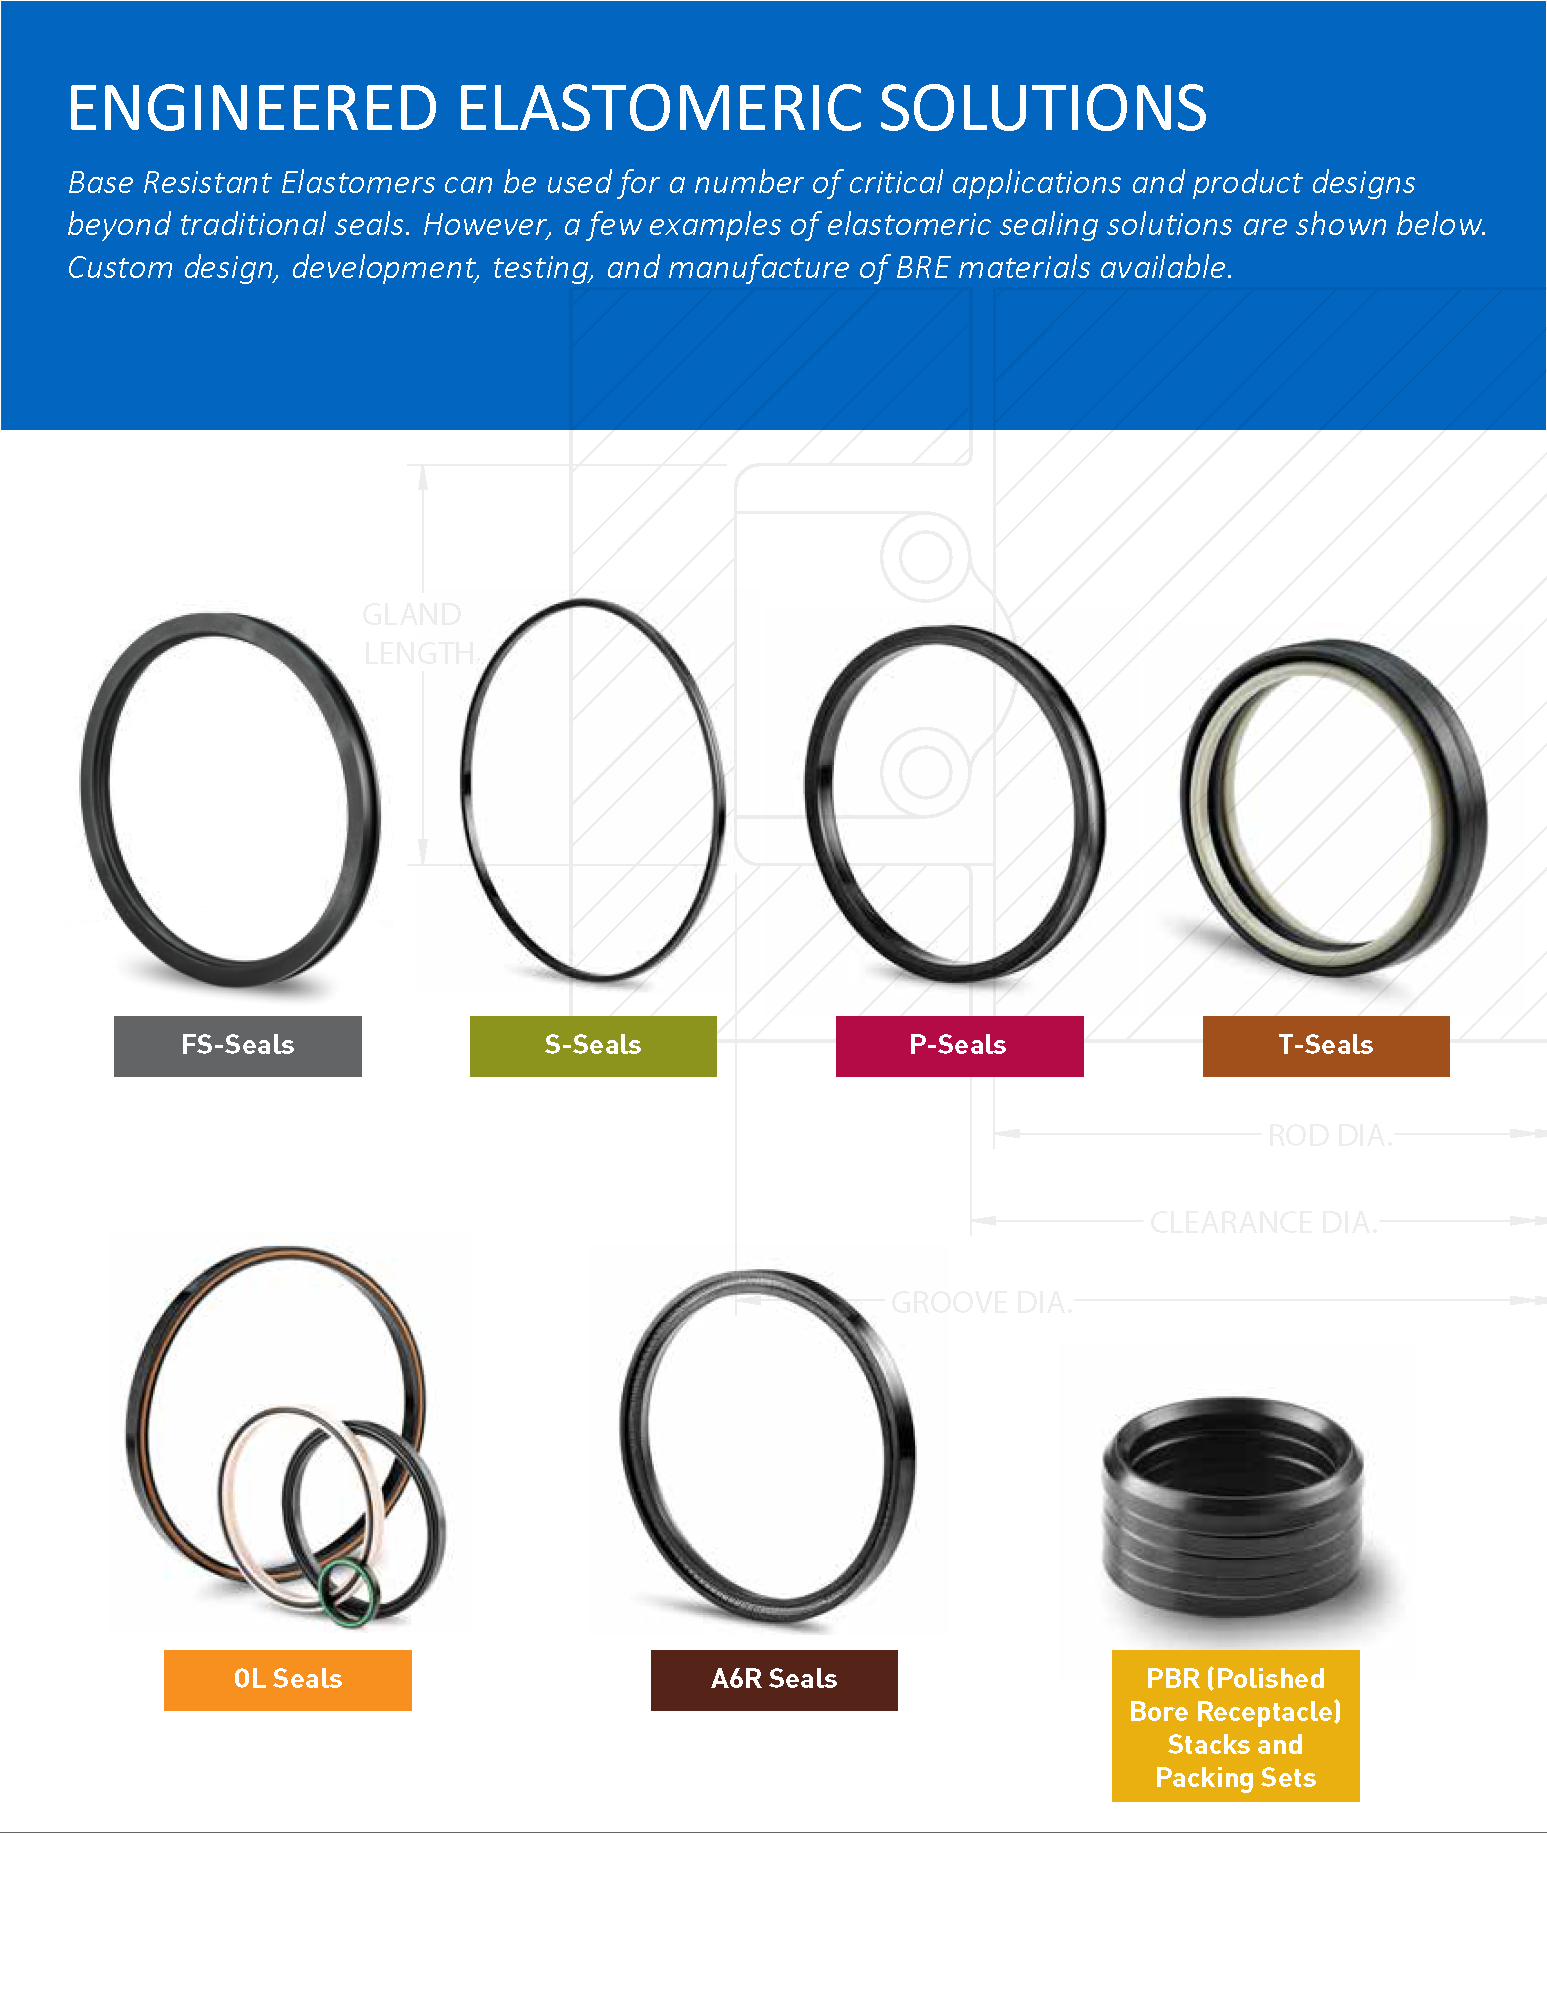 Applications for BREs include bonded seals requiring excellent bond strength in extreme environments, in S-seals, T-Seals, or V-rings.